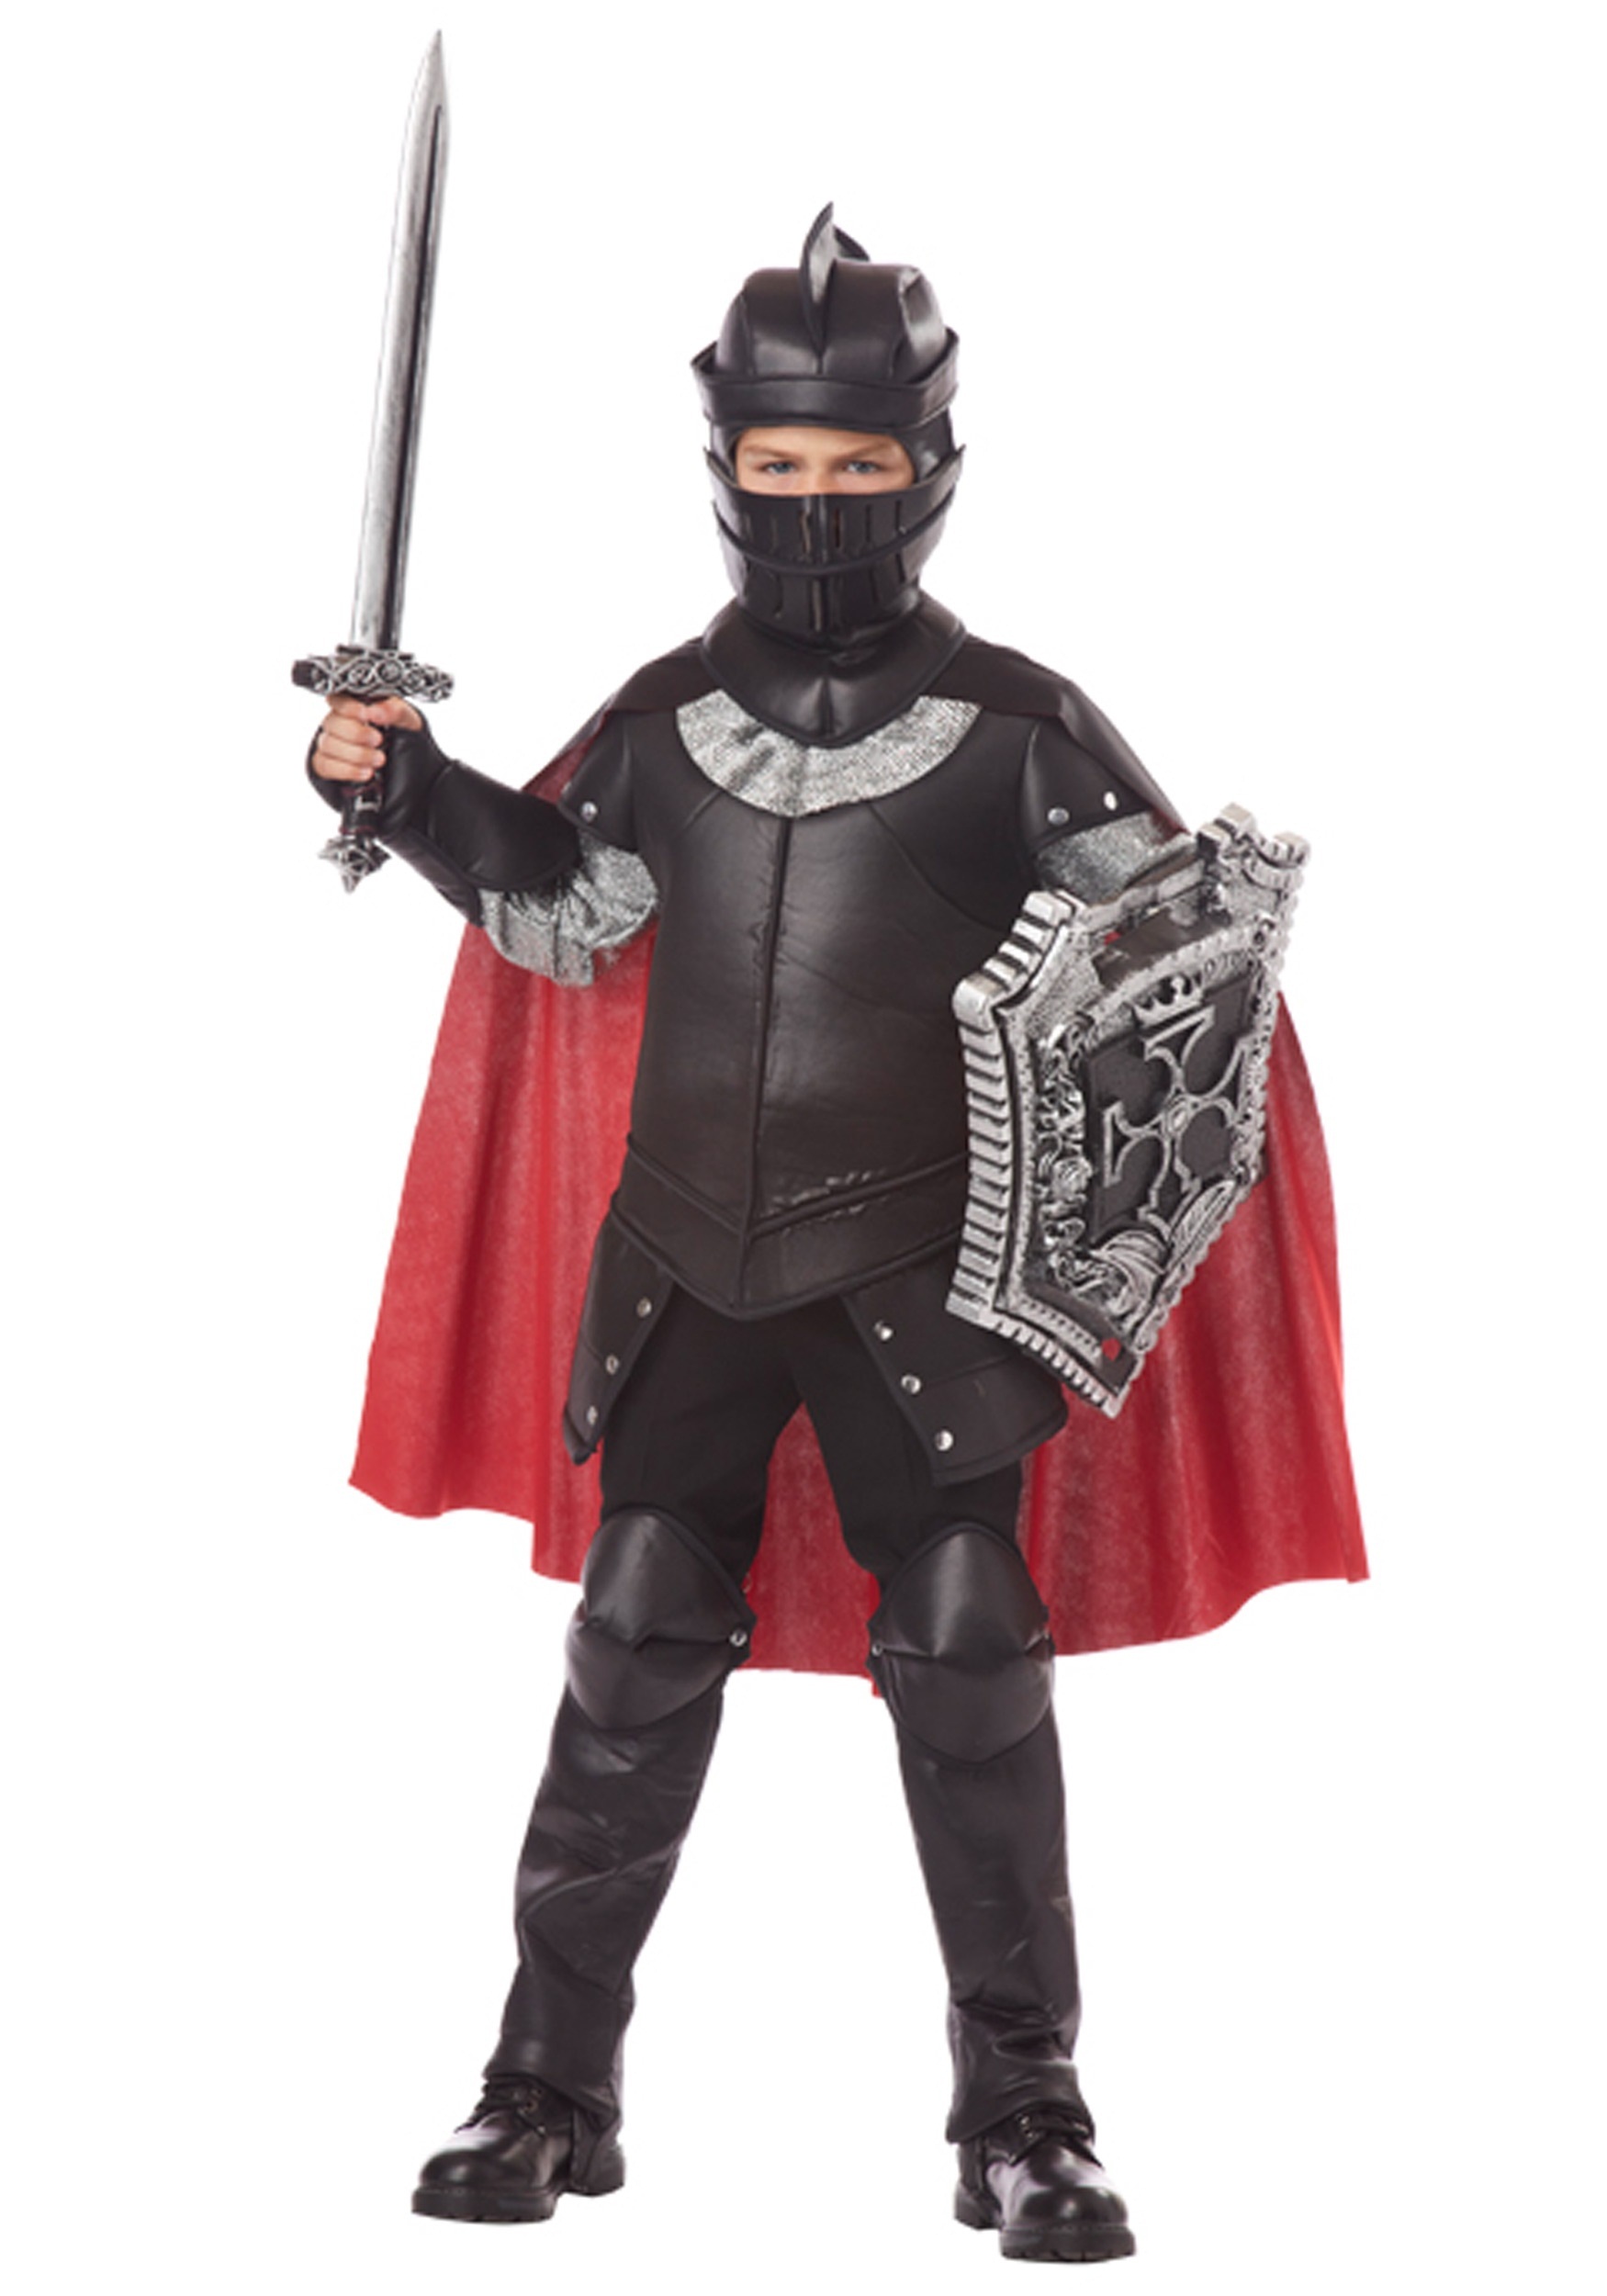 The Black Knight Costume For Boys